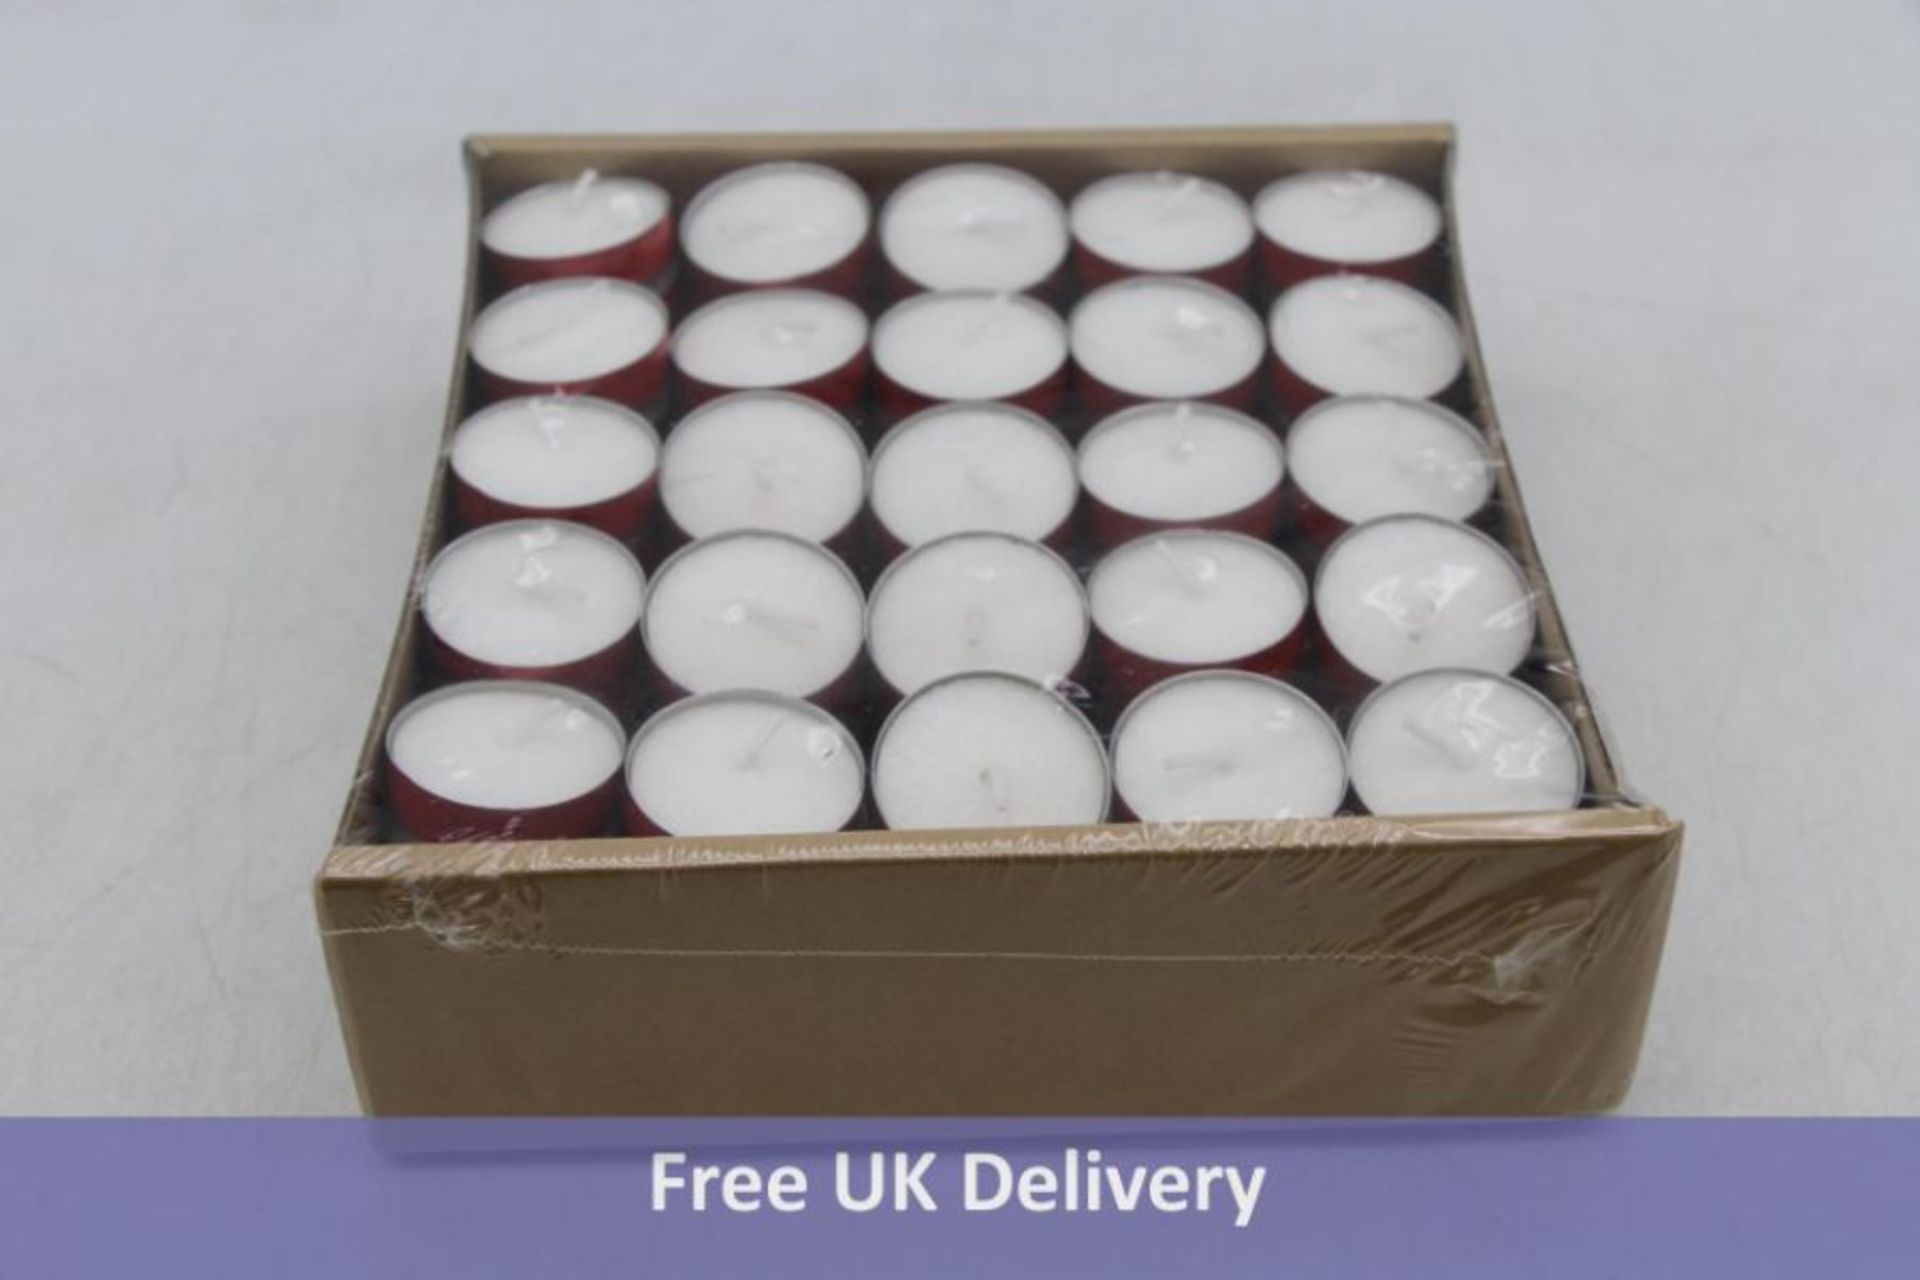 Four packs of 125x 2-hour Votive Light, Red